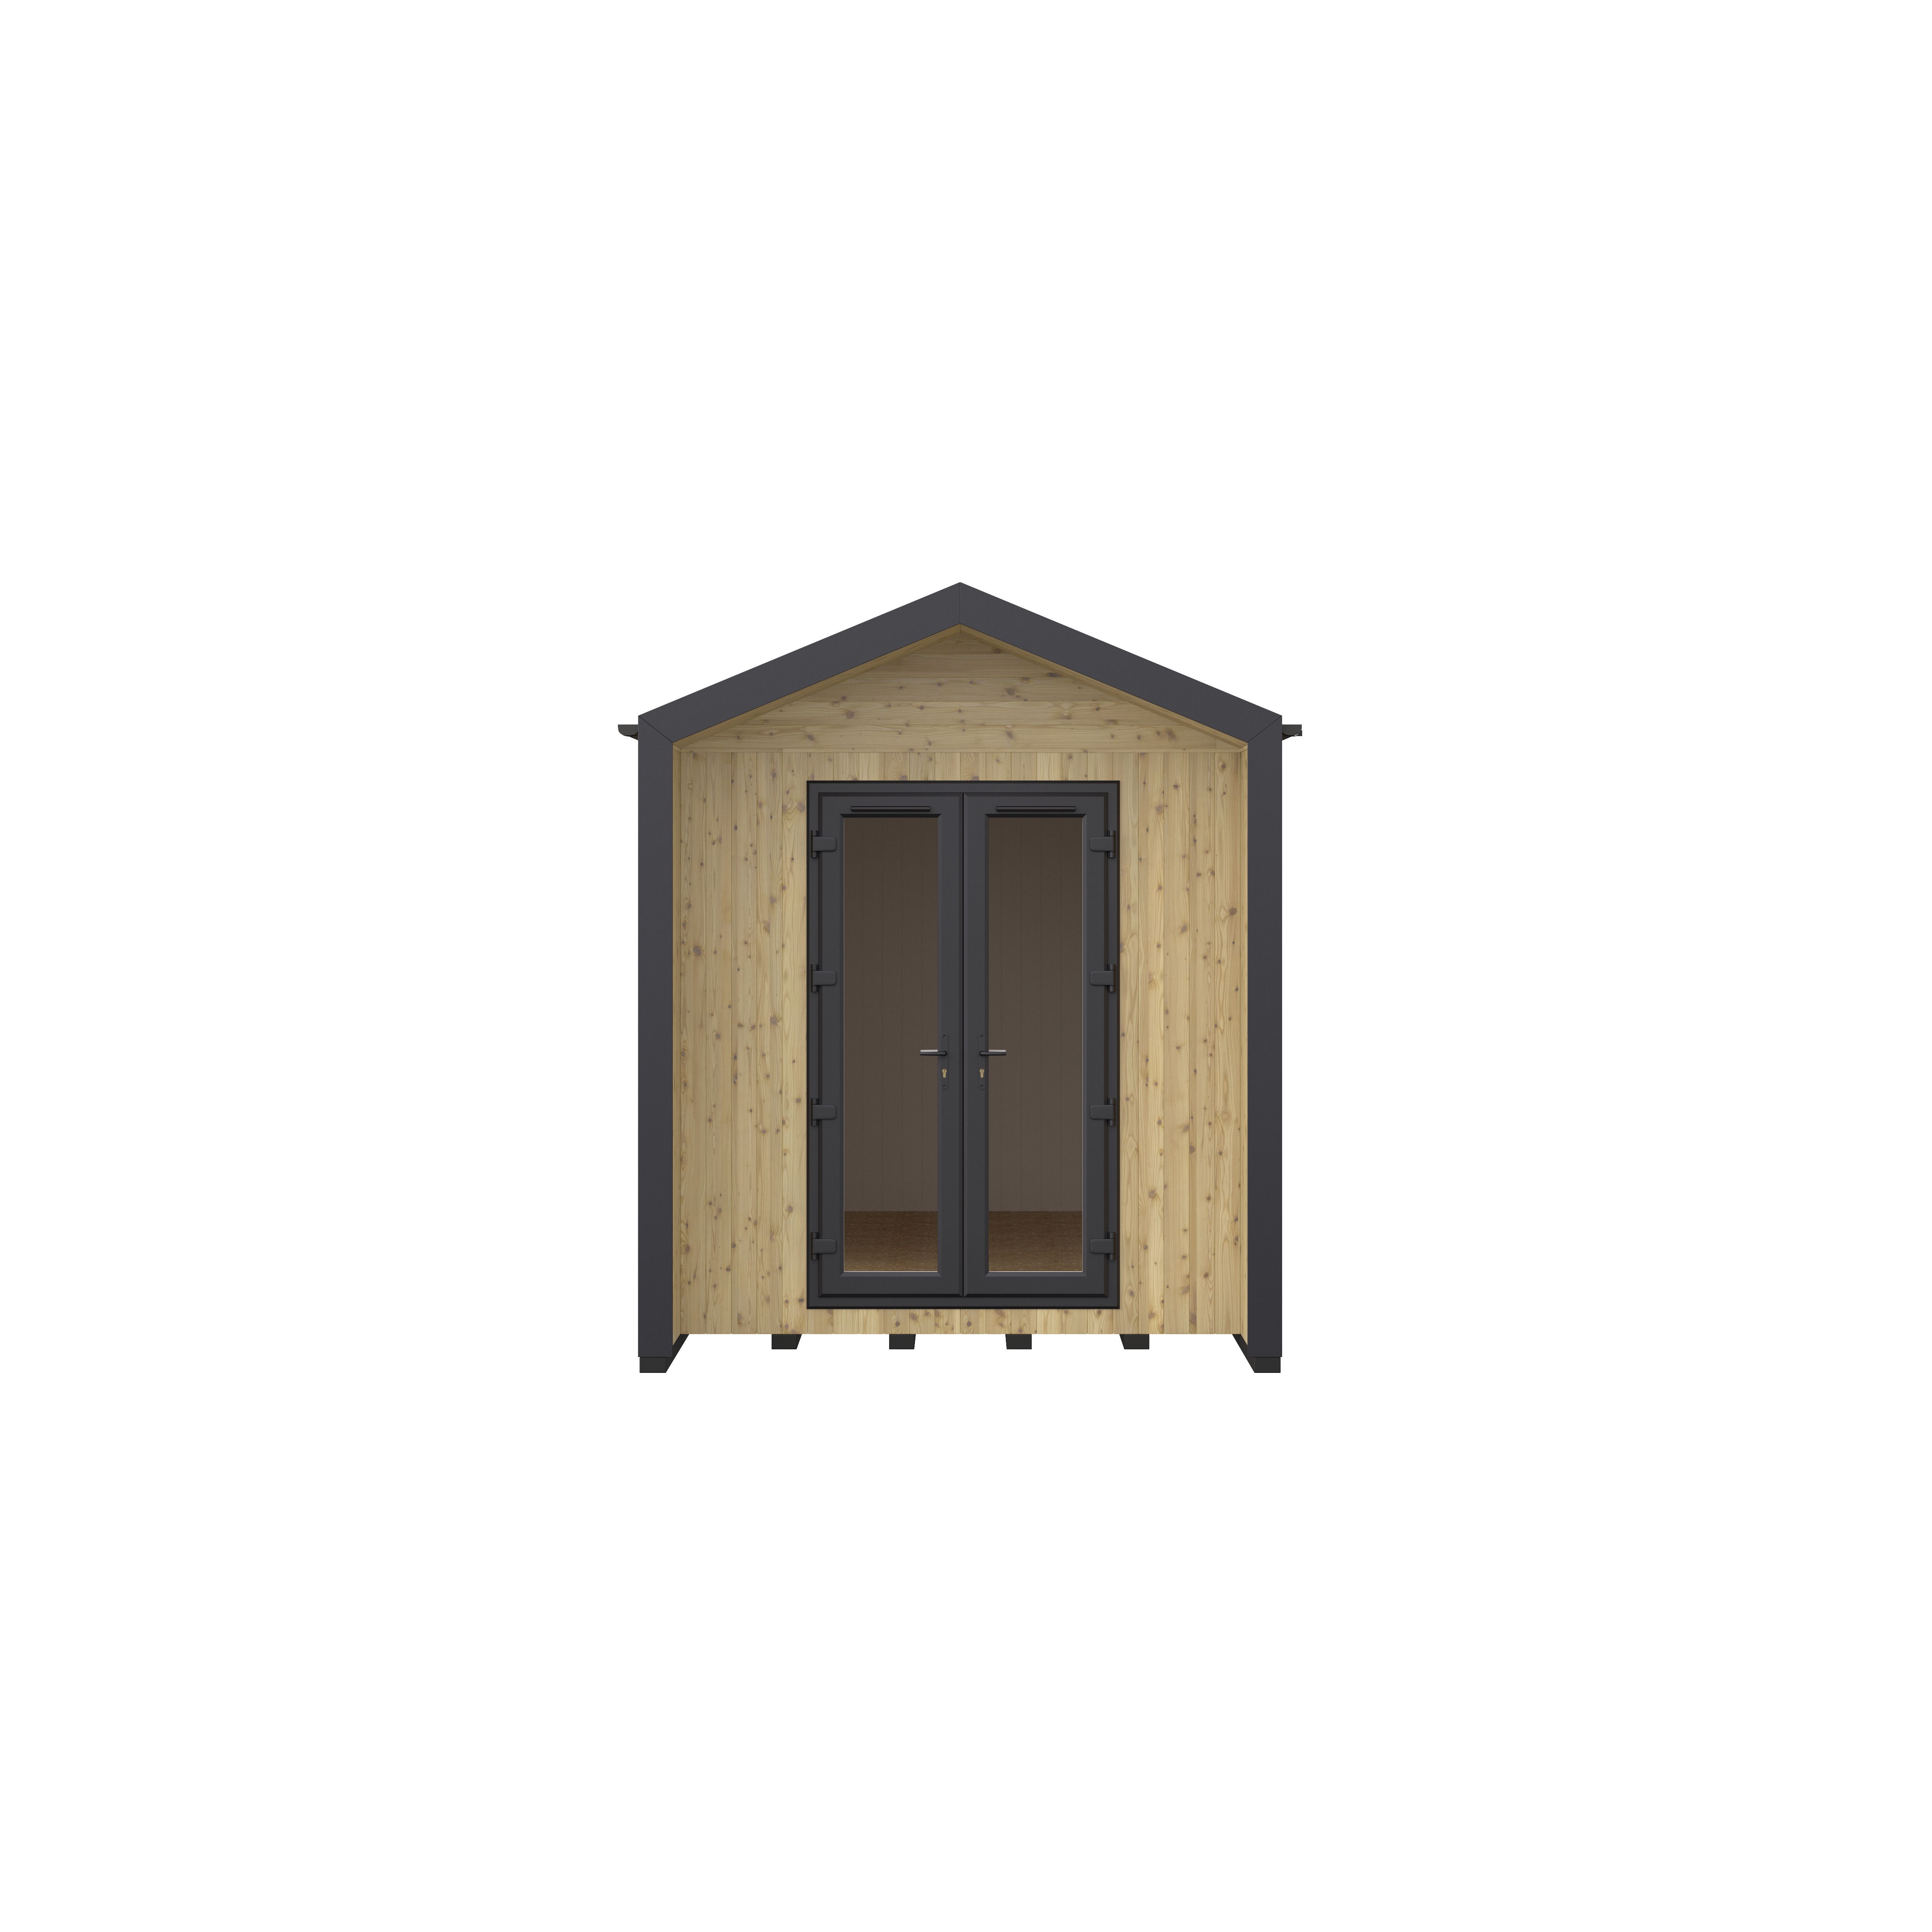 GoodHome Semora 8x14 ft with Double door Pitch Concrete Garden room 2.4m x 4.4m (Base included)